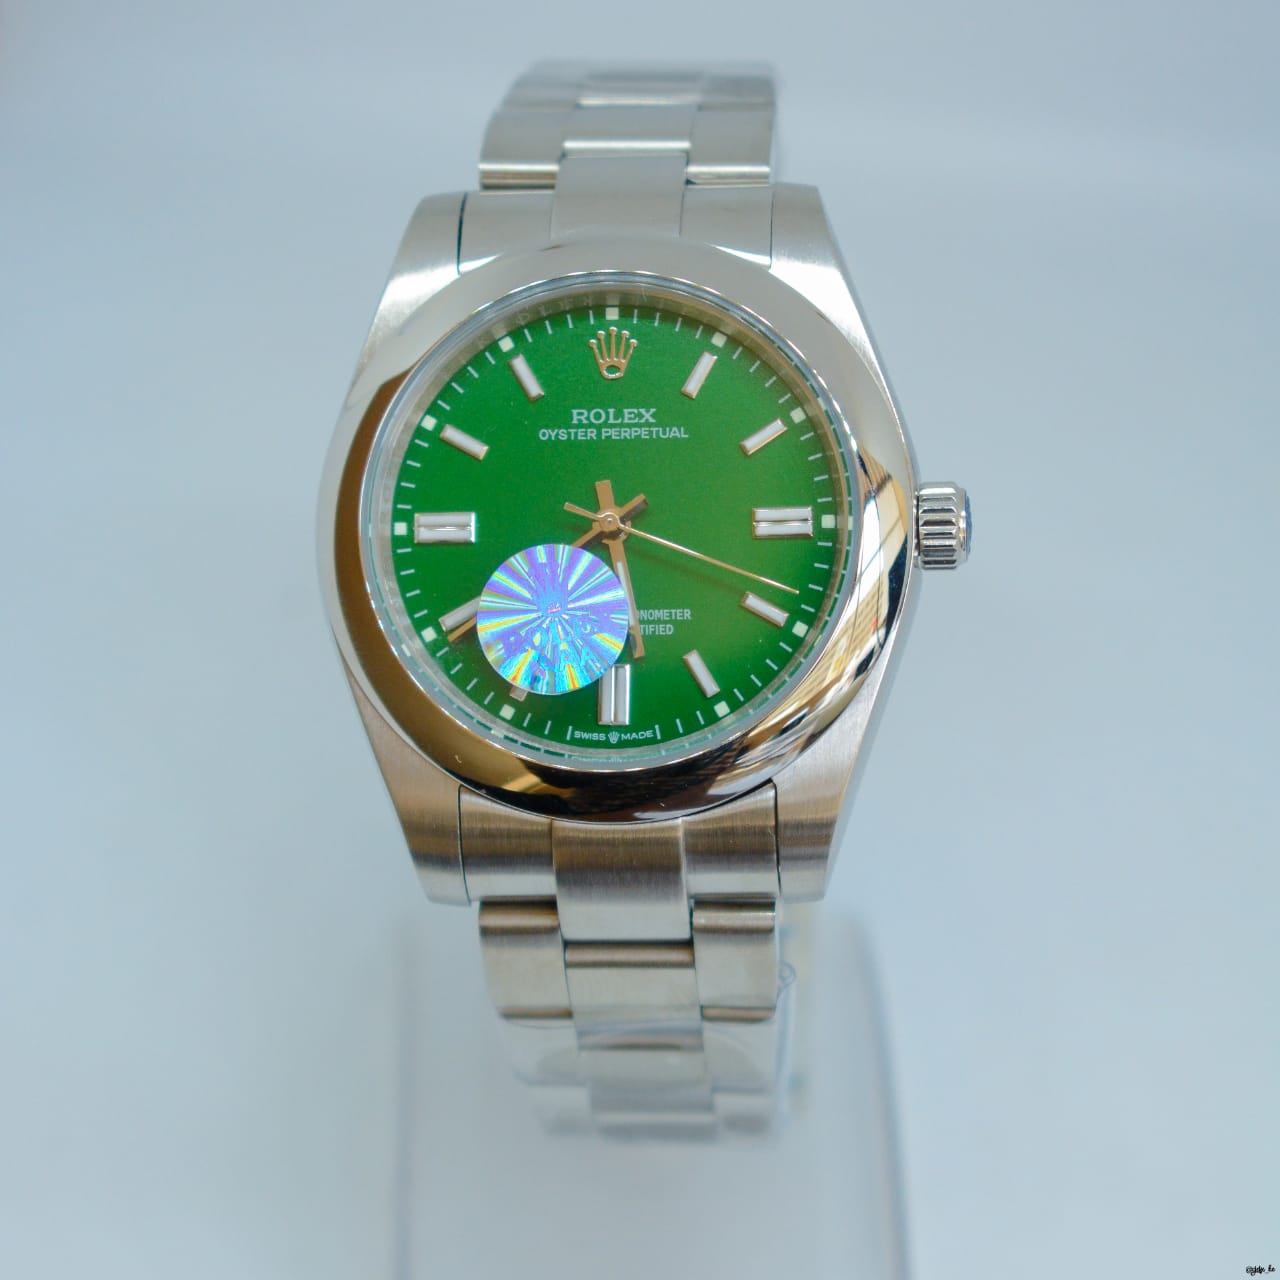 Rolex Oyster Perpetual 41 mm oyster steel Watch for sale in Nairobi Kenya